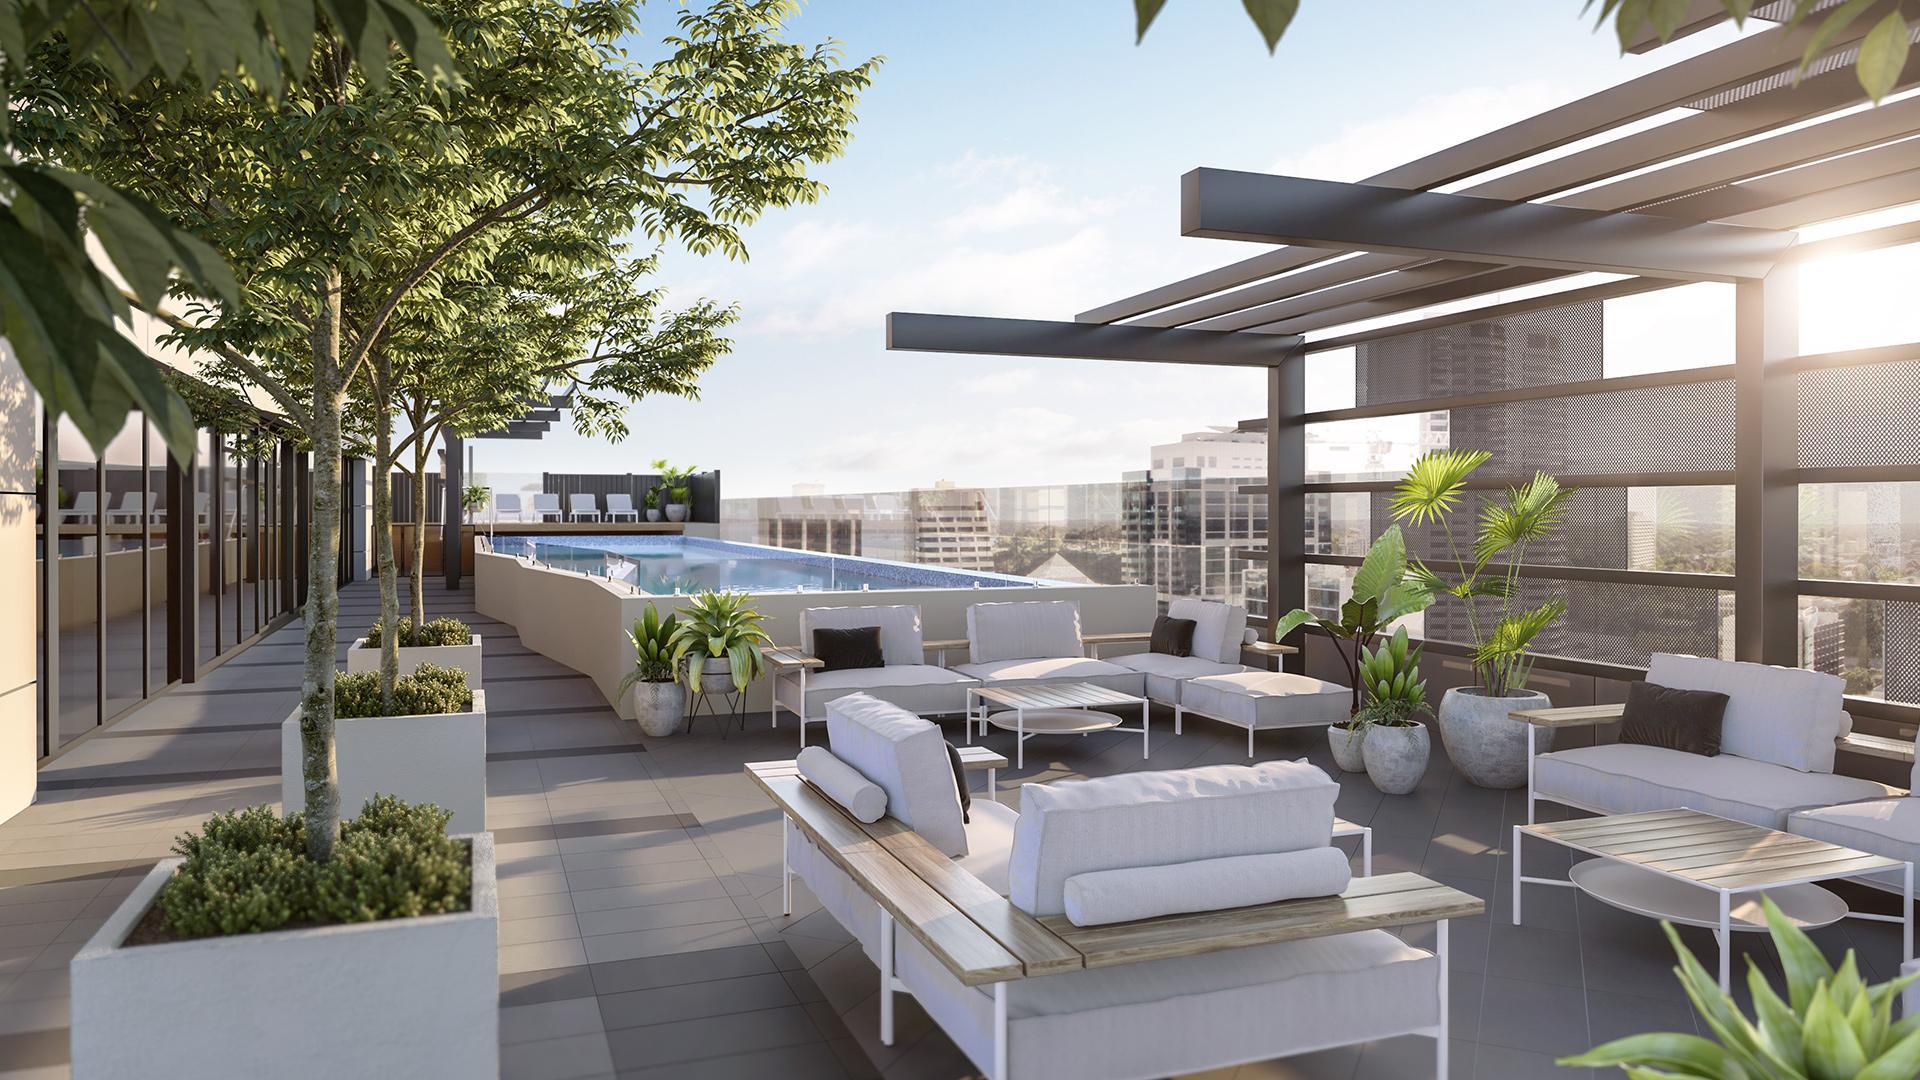 NV Apartments Perth - Rooftop CG Render by Constructive Media